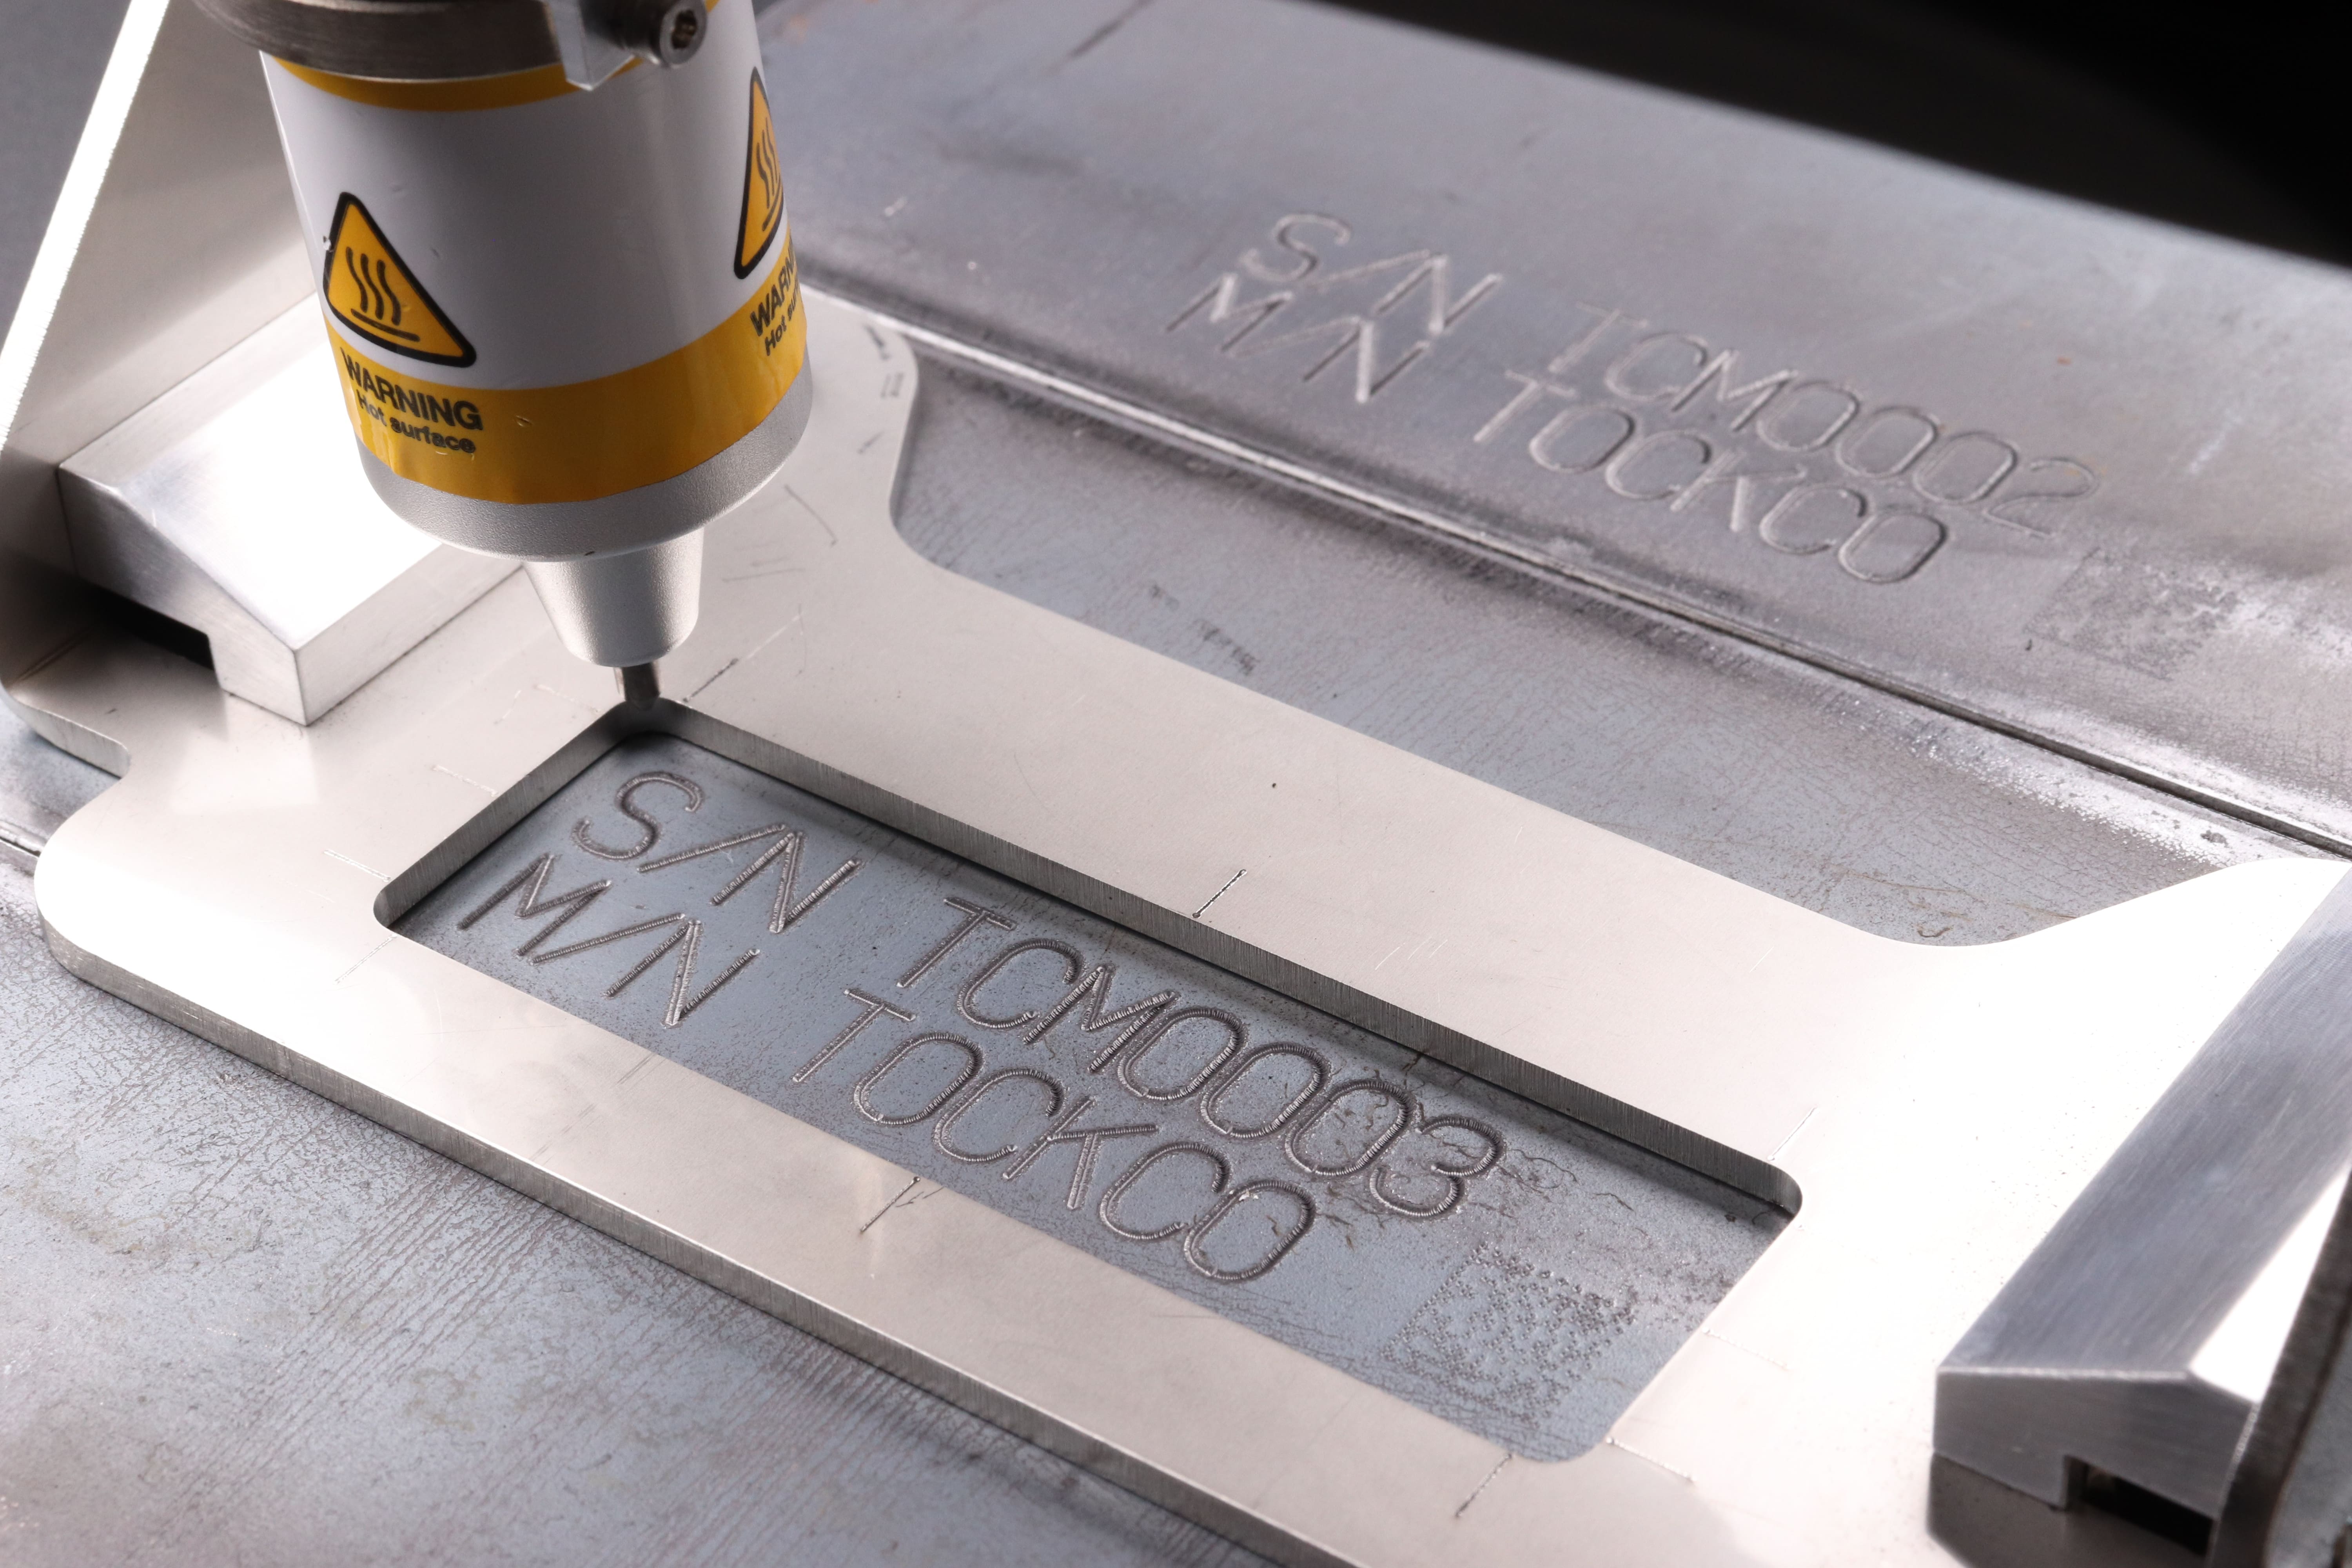 Image of metal steel material engraved with text and numbers 'S/N TCM0003 M/N TOCKCO'.